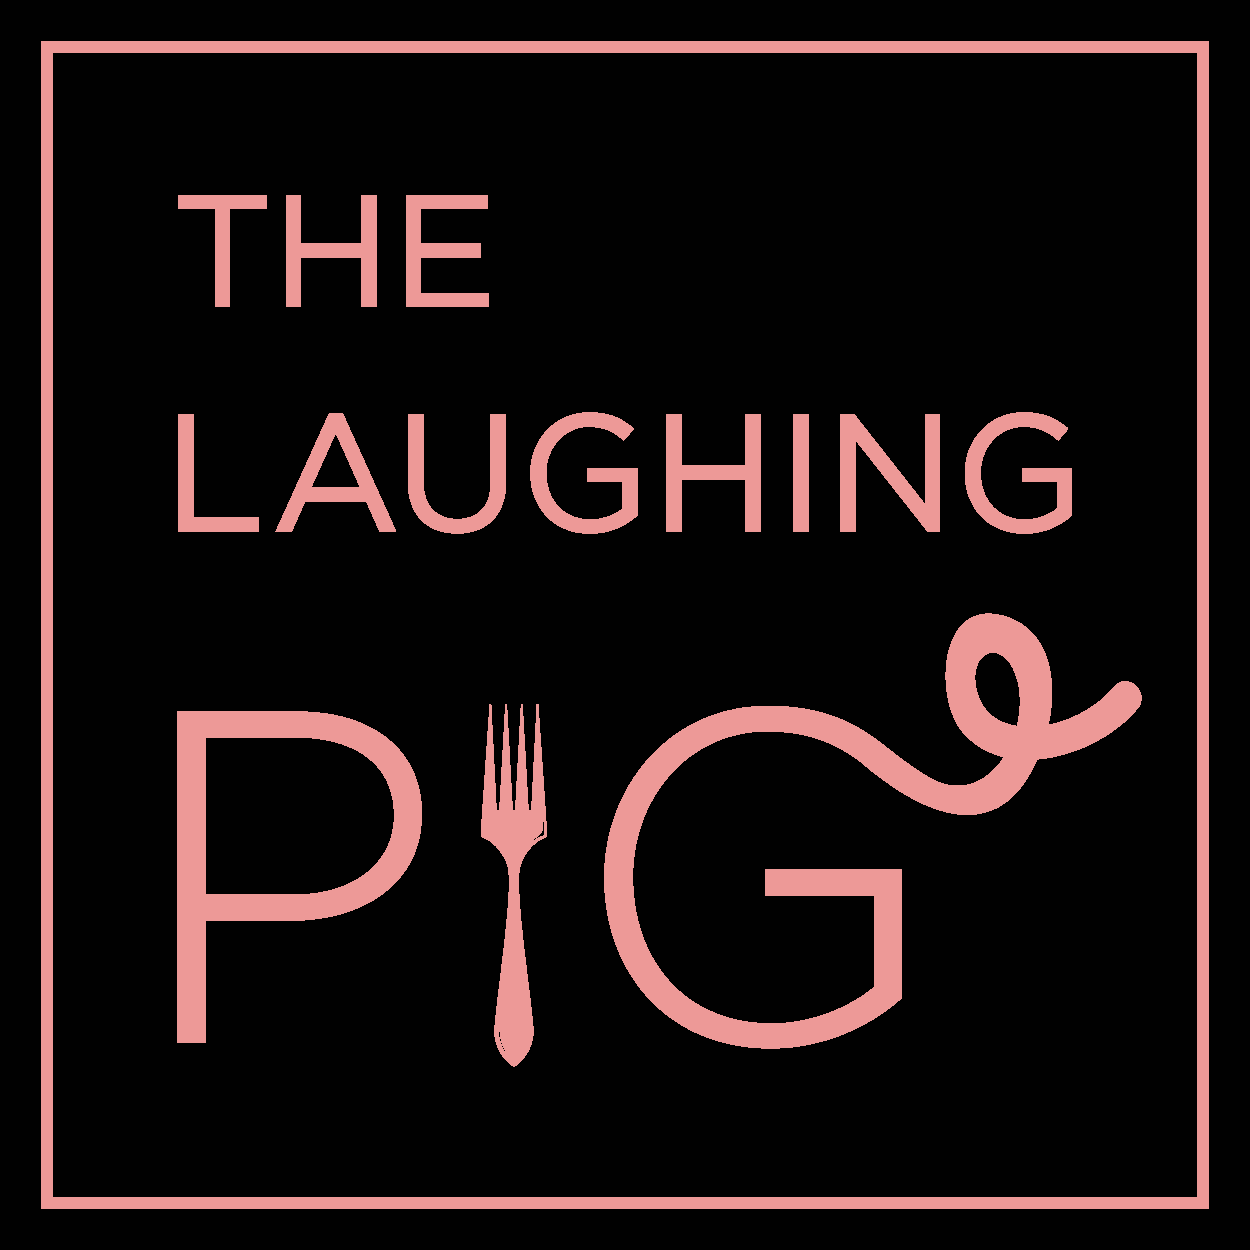 The Laughing Pig Identity